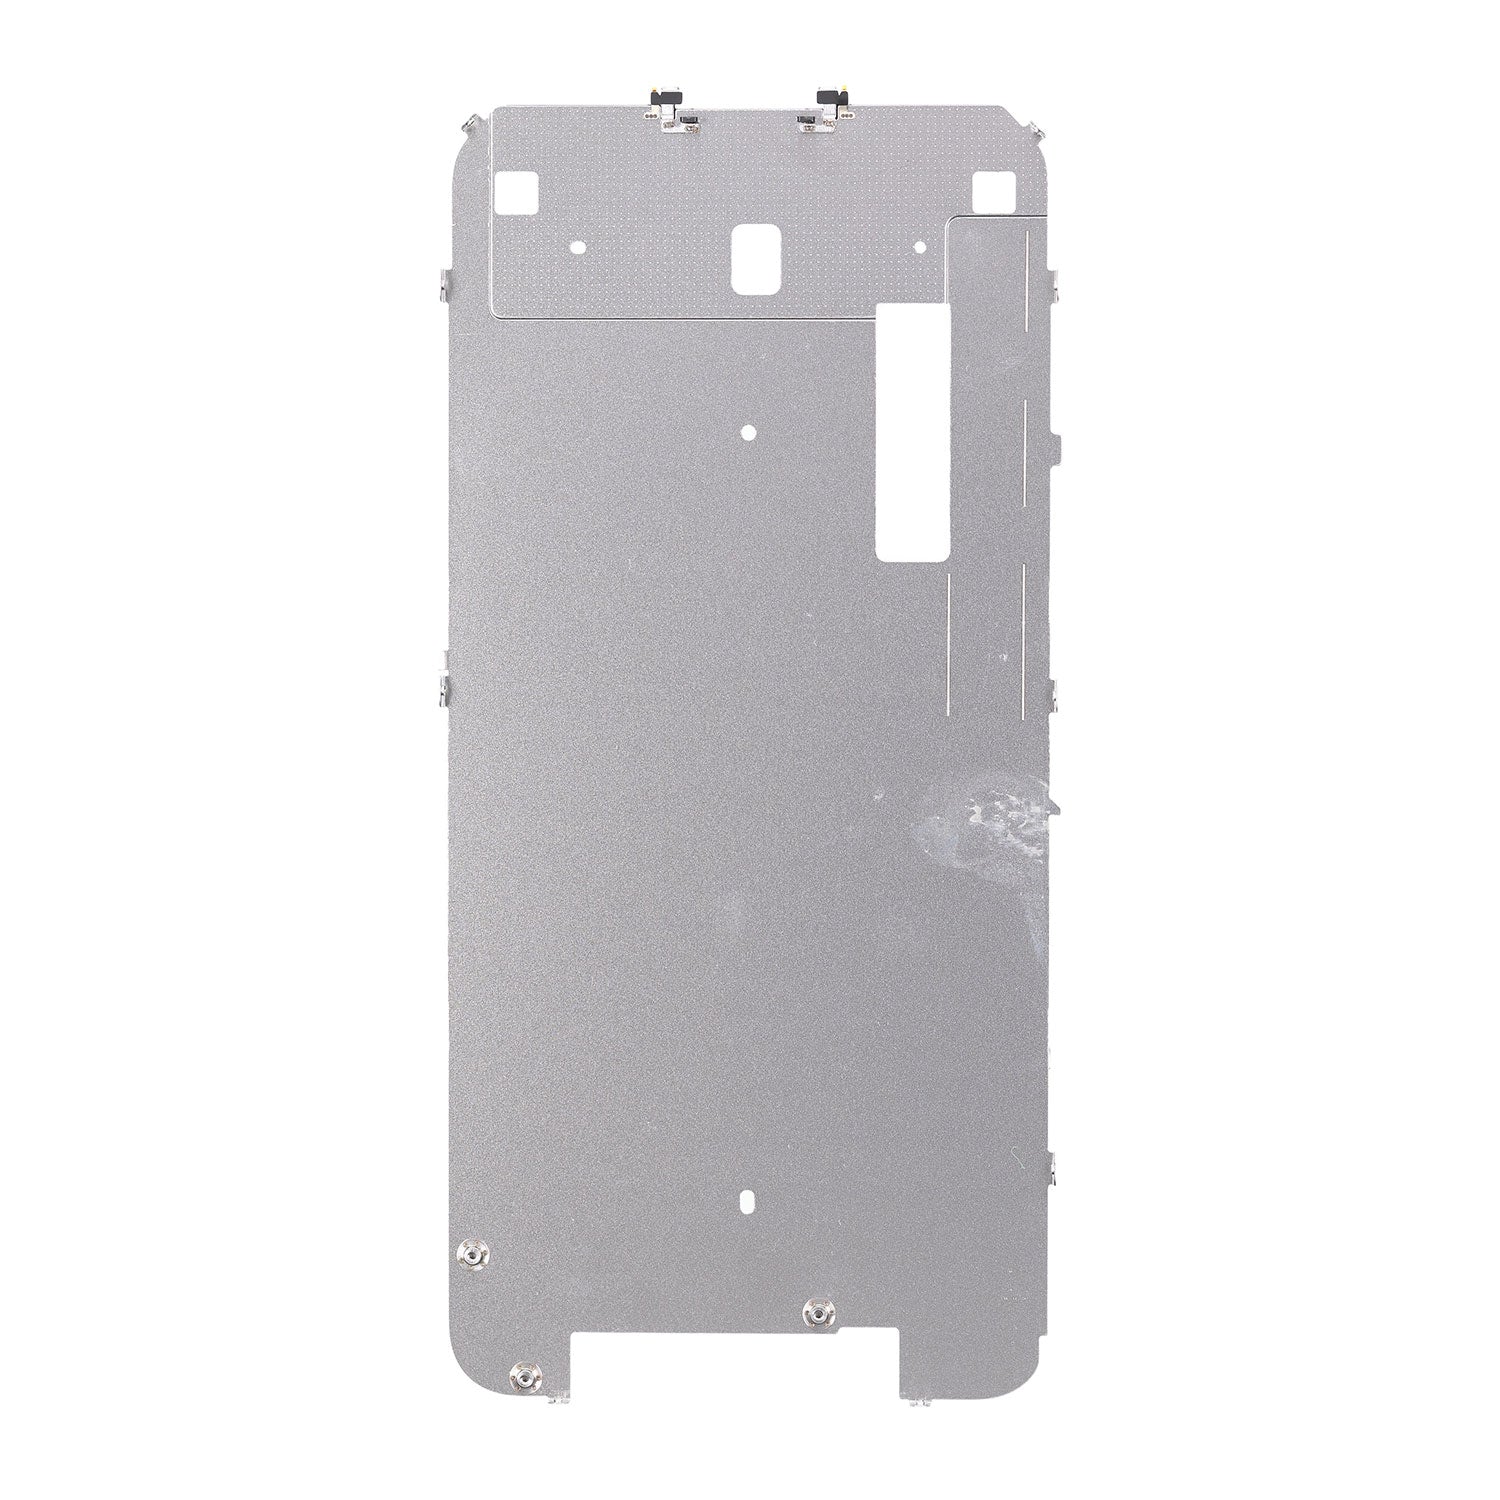 LCD SHIELD PLATE FOR IPHONE XR